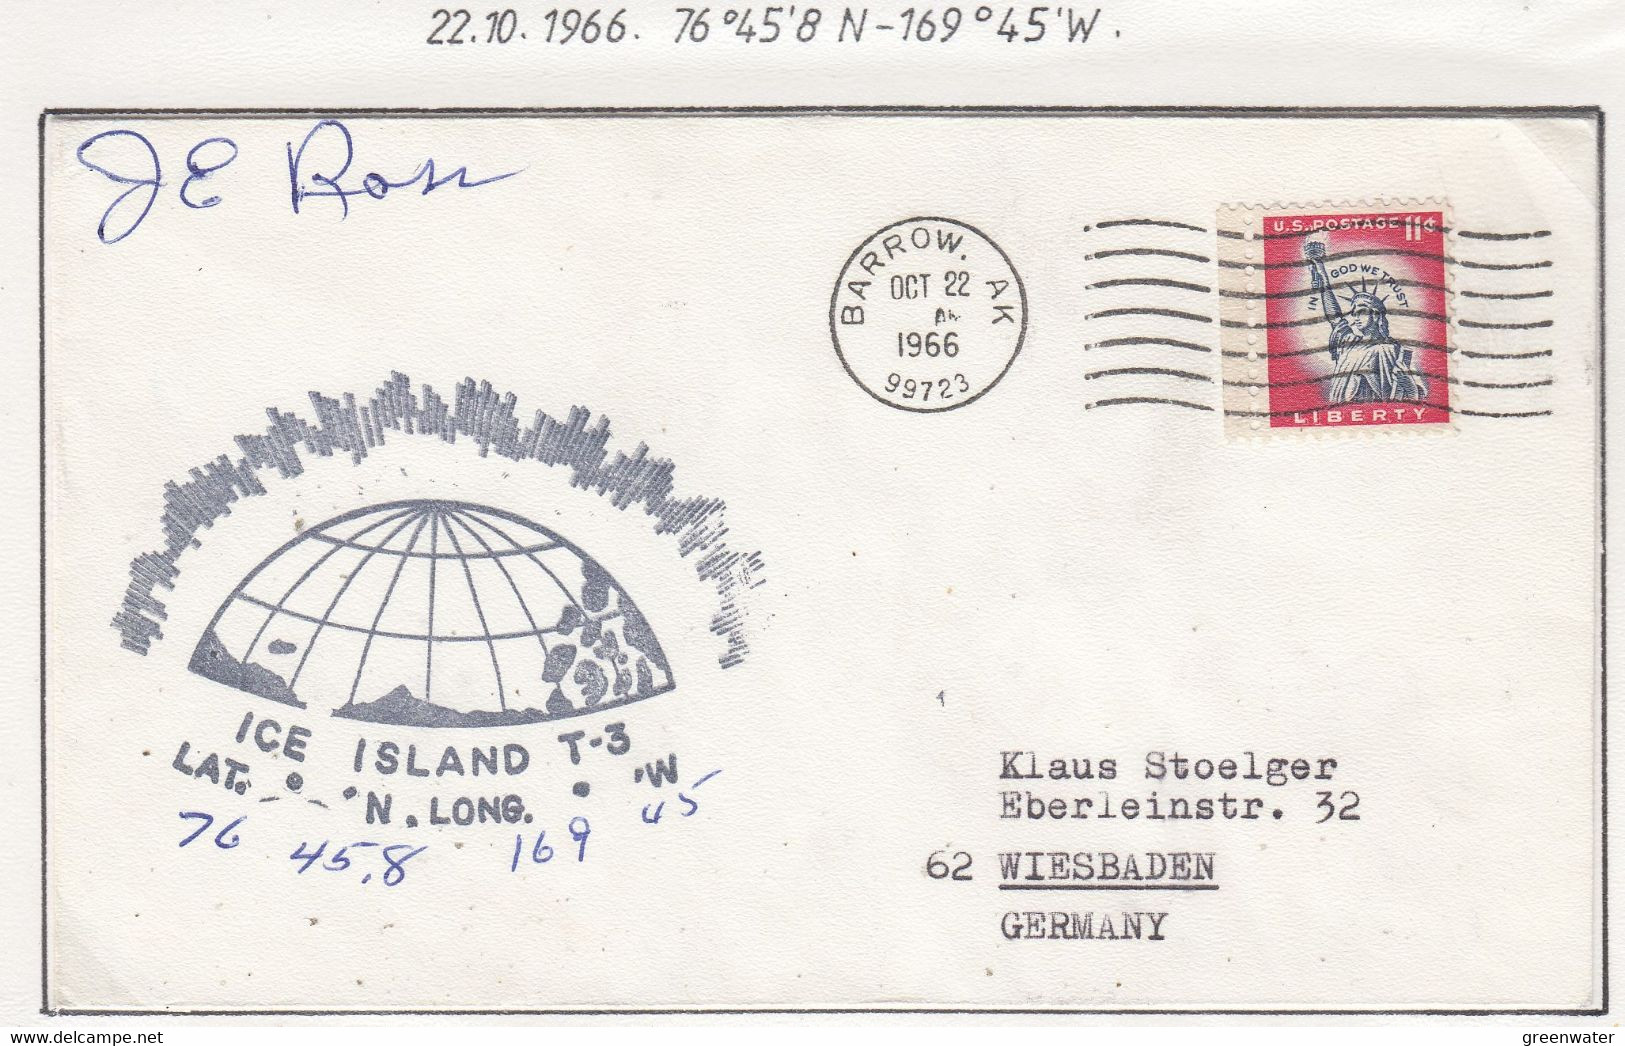 USA Driftstation ICE-ISLAND T-3 Cover Ice Island T3-Periode 4 Ca OCT 221966 Signature J.R. Ross Camp Manager (DR118C) - Scientific Stations & Arctic Drifting Stations